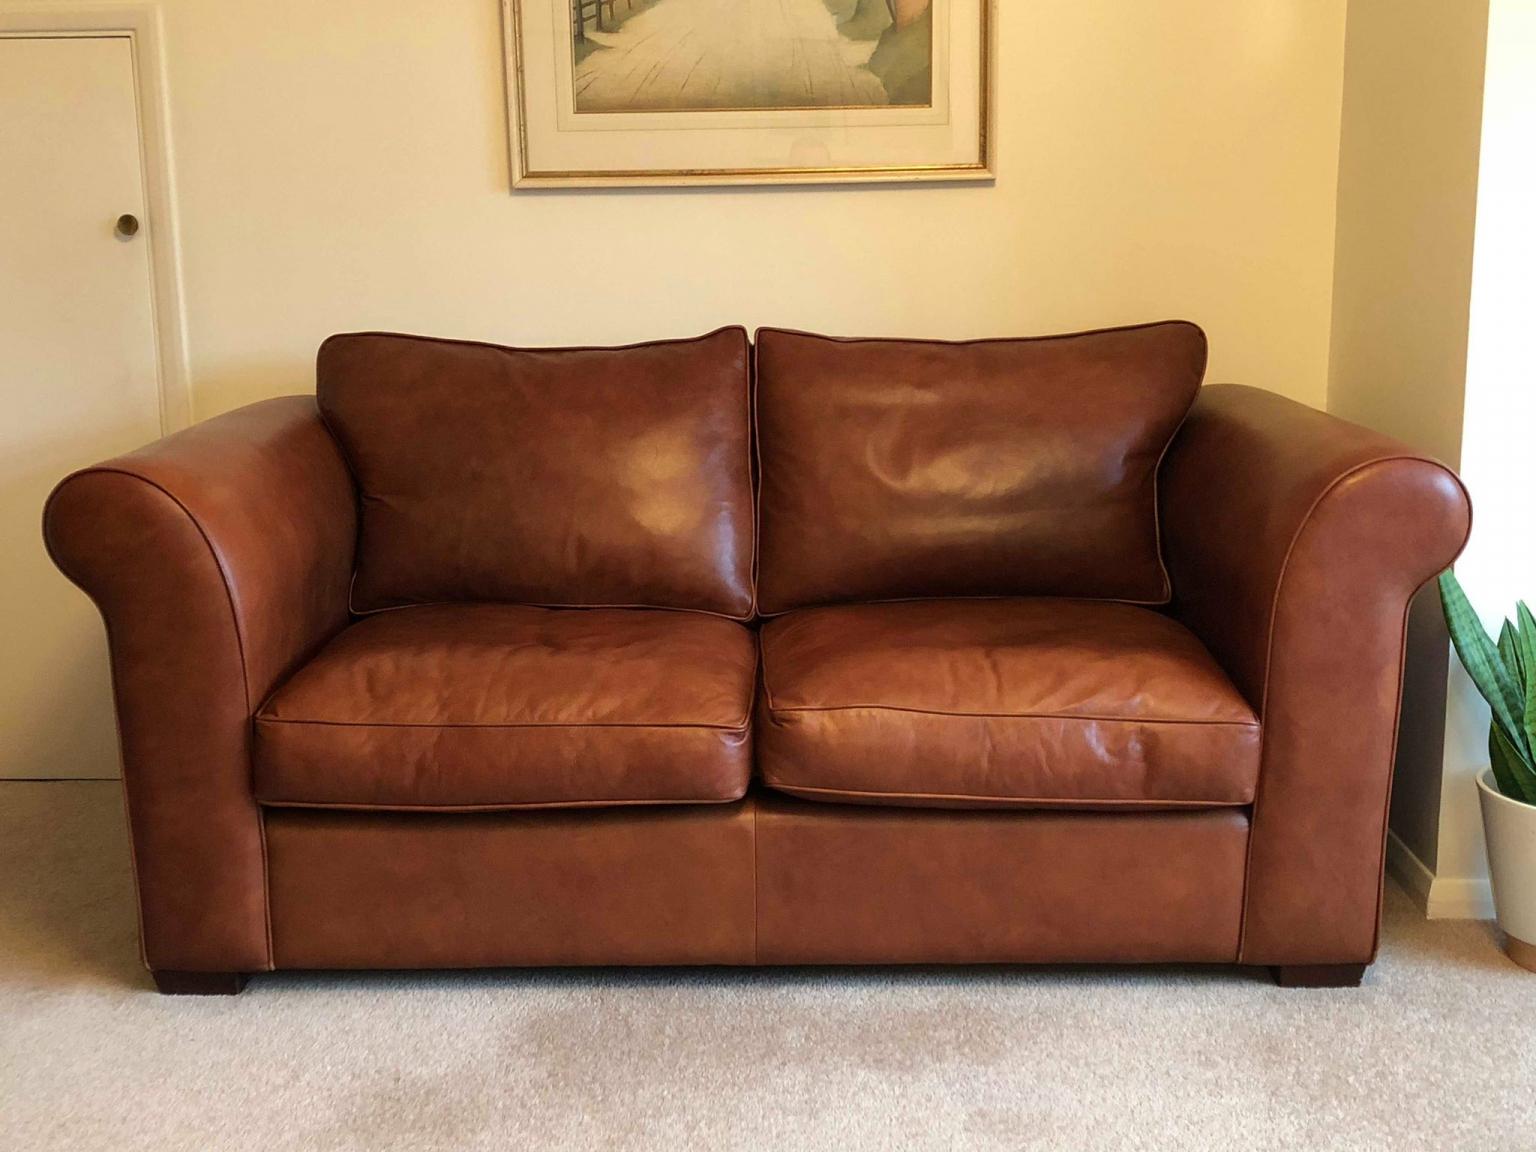 laura ashley brown leather sofa bed